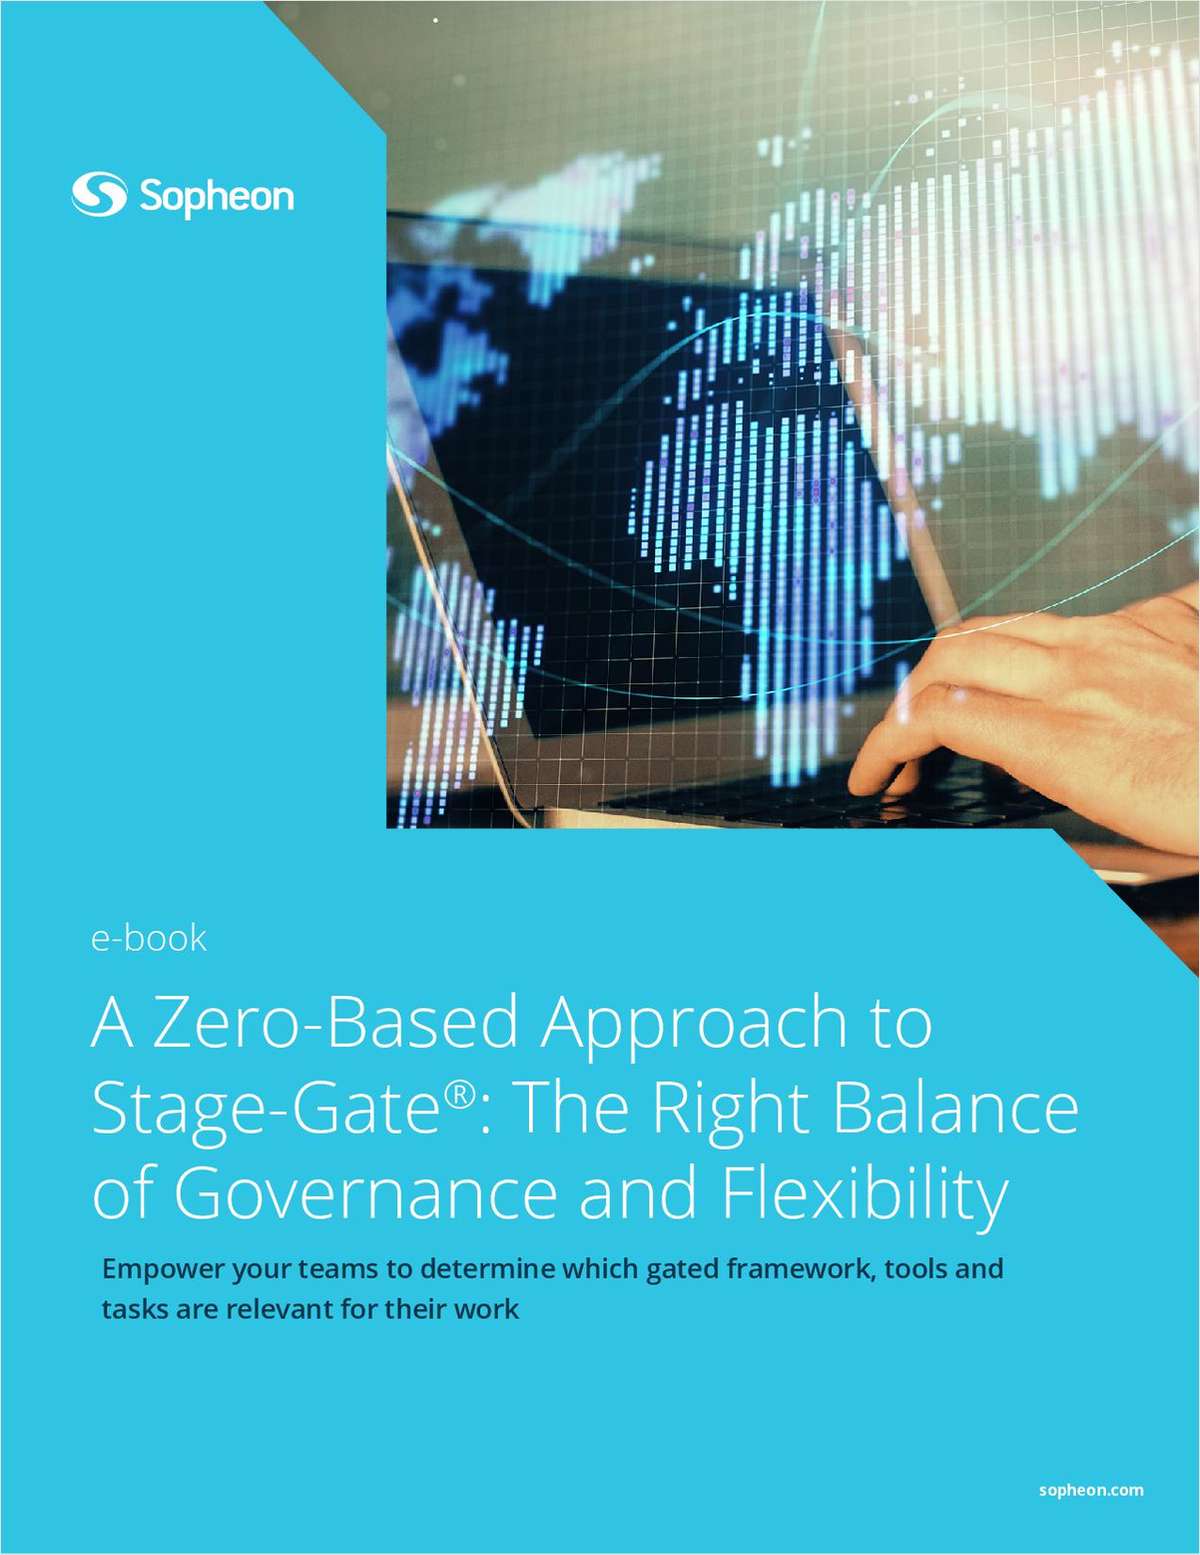 A Zero-Based Approach to Stage-Gate®